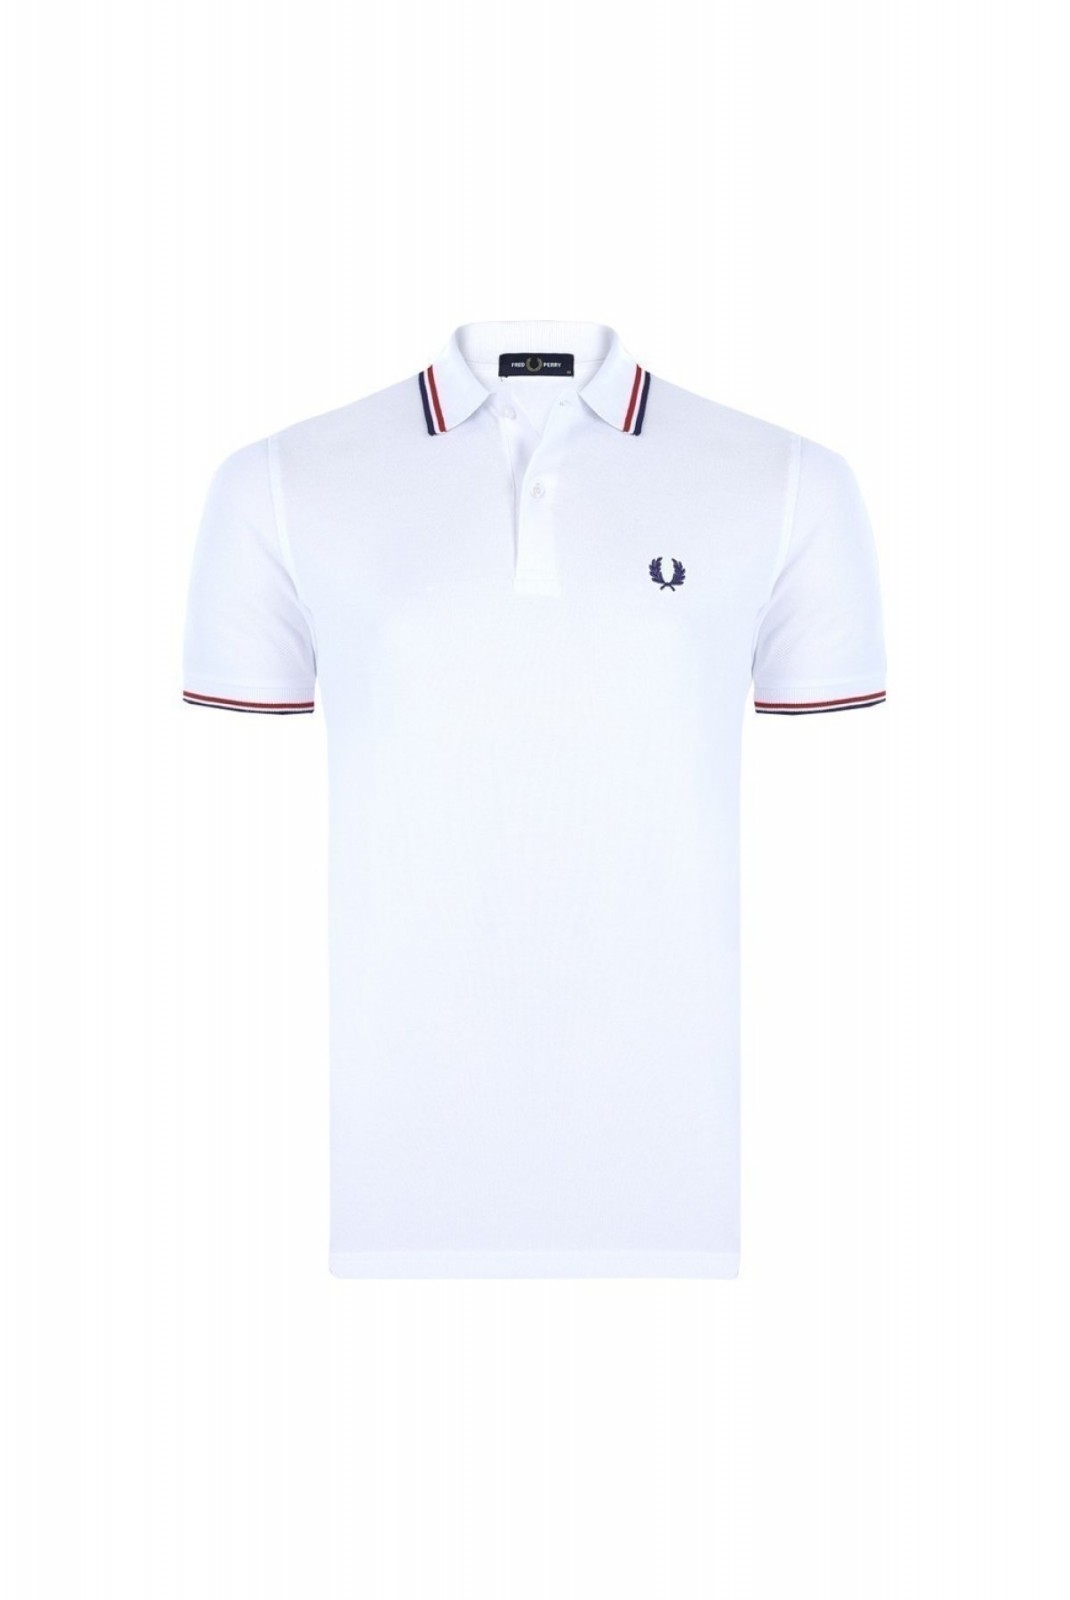 Polo Classique coton piqué Fred perry 748 White/bright red/navy M2100